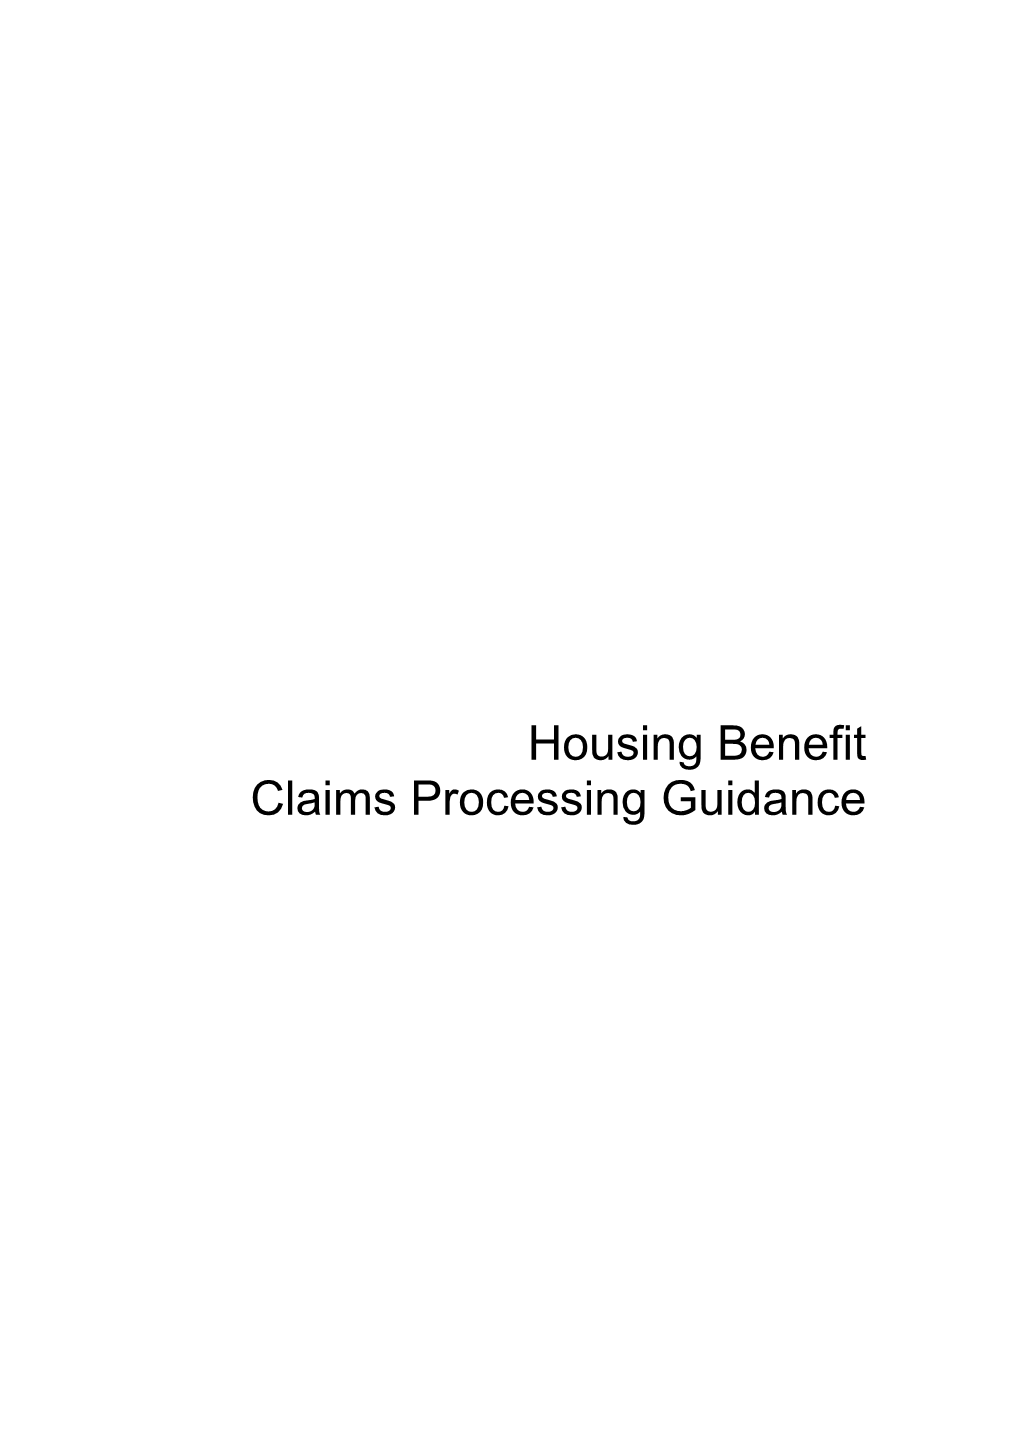 Housing Benefit Claims Processing Guidance Contents